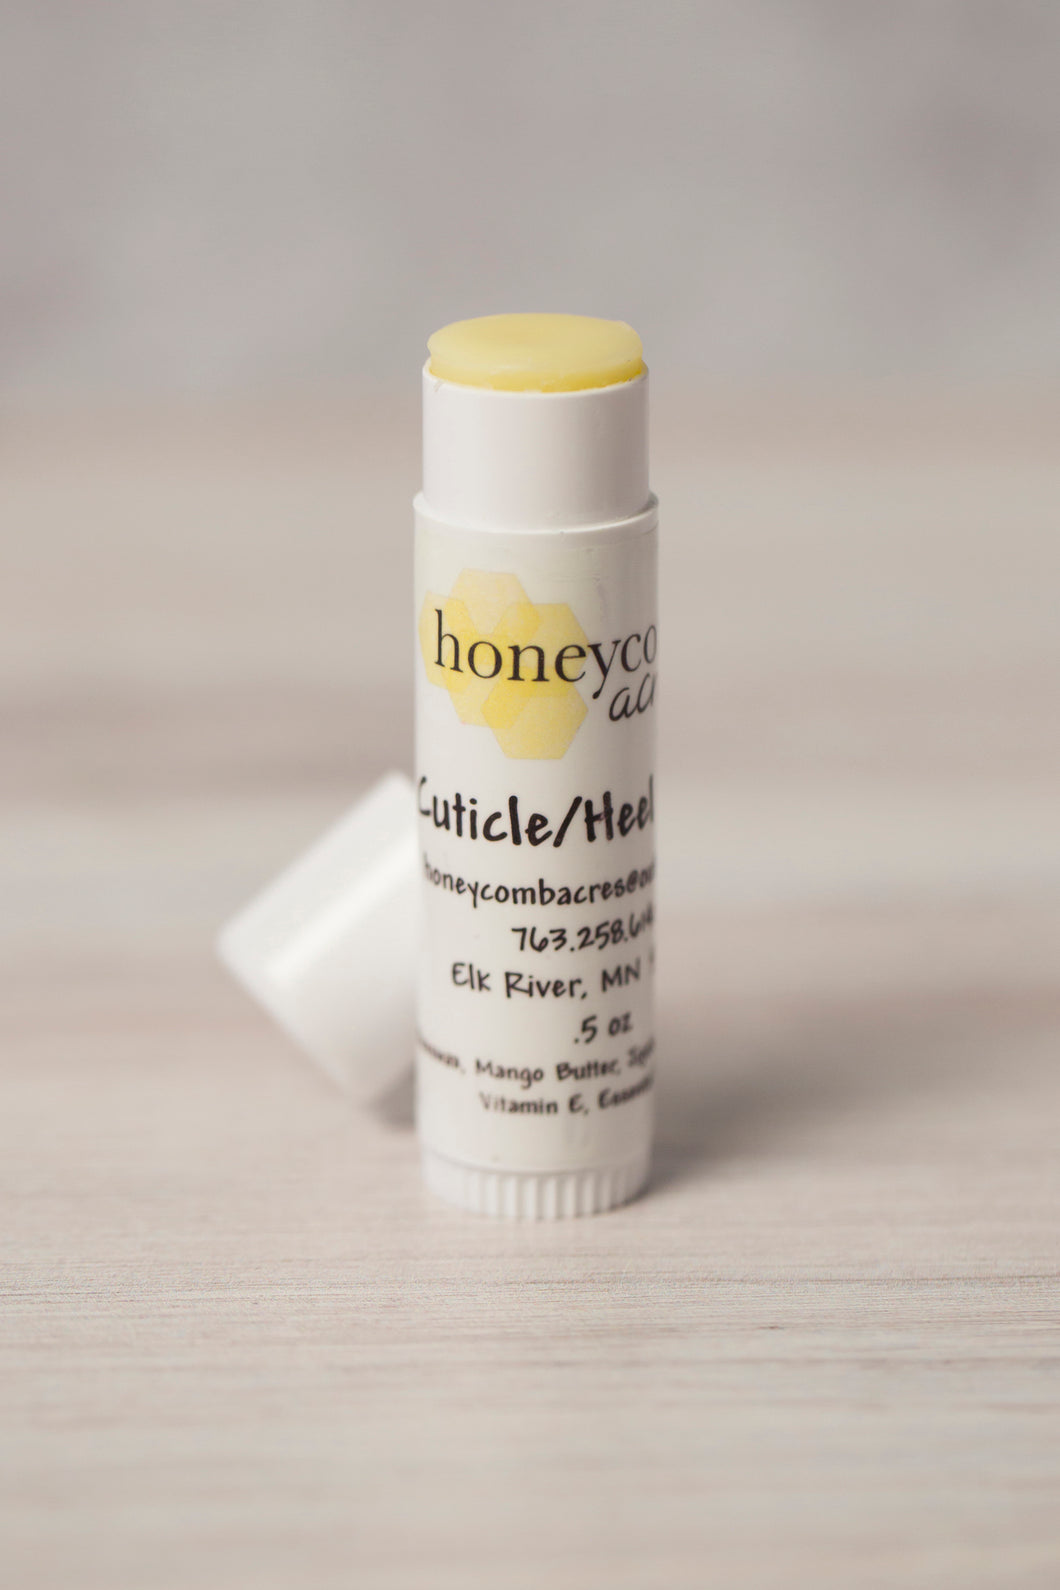 Elbow and Heel Balm